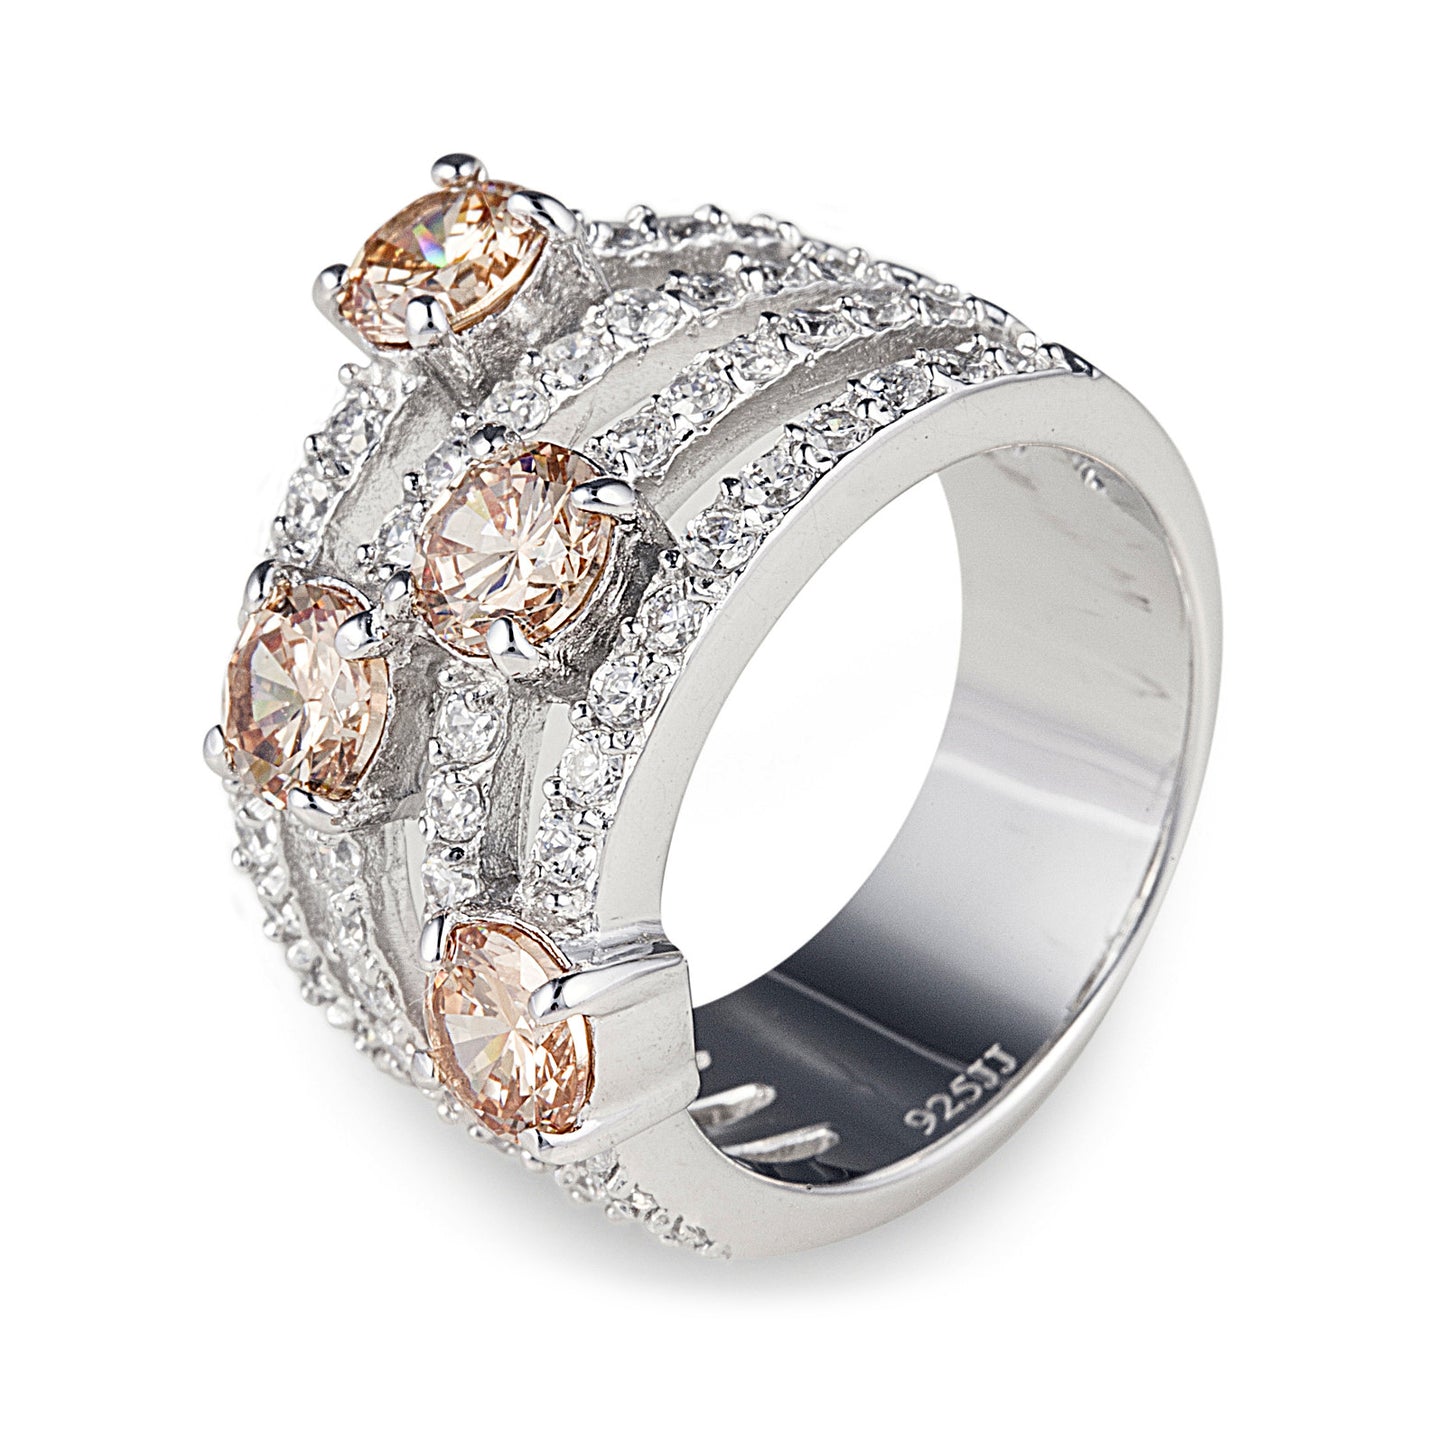 Royal Corona Ring is a gorgeous multi-layered 925 sterling silver ring featuring rows of clear cubic zirconia stones with four scattered champagne cubic zirconia stones. Worldwide shipping. Affordable luxury jewellery by Bellagio & Co.